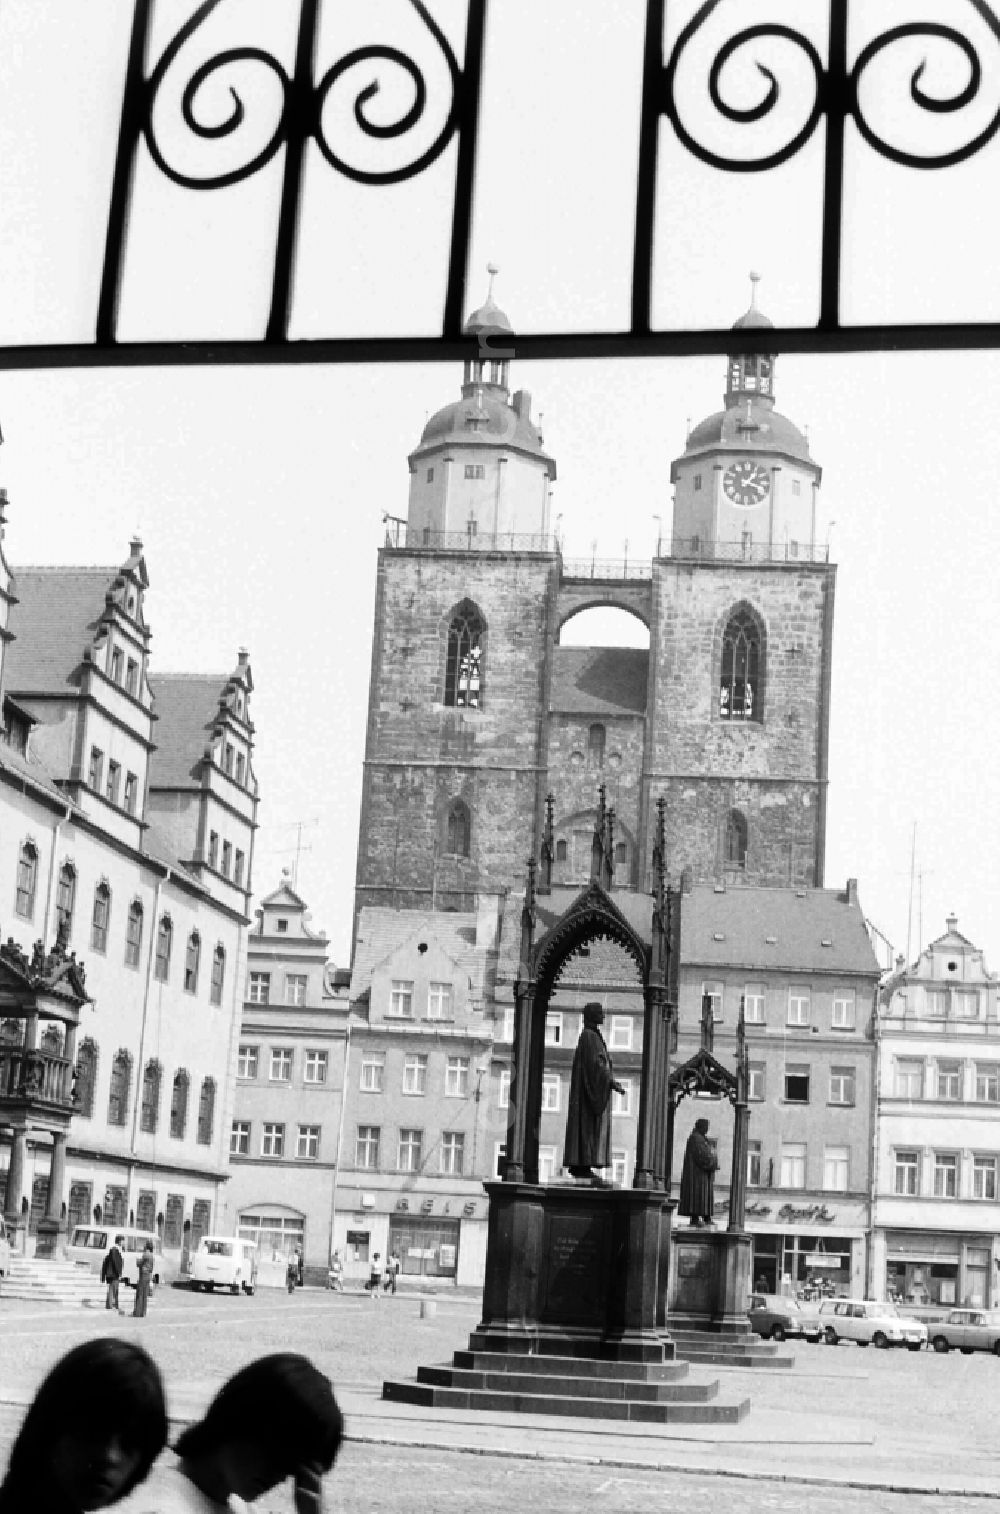 GDR photo archive: Lutherstadt Wittenberg - Guided tour and sightseeing on the occasion of a city tour General G. Goettnig in Lutherstadt Wittenberg in the federal state of Saxony-Anhalt on the territory of the former GDR, German Democratic Republic